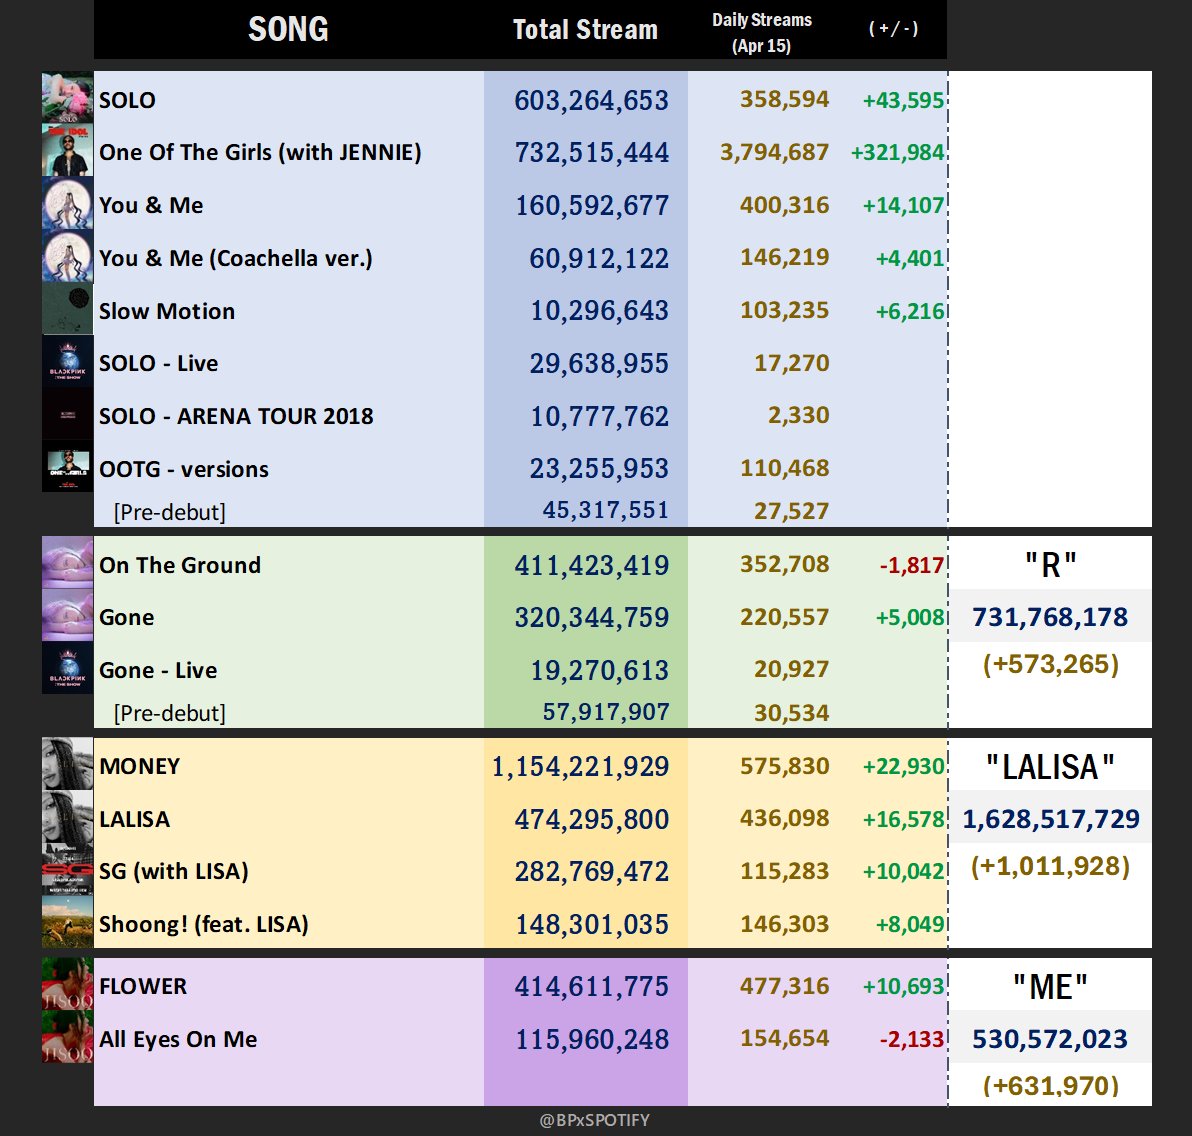 📊|Daily top songs on Spotify (Apr 15) ~ Members